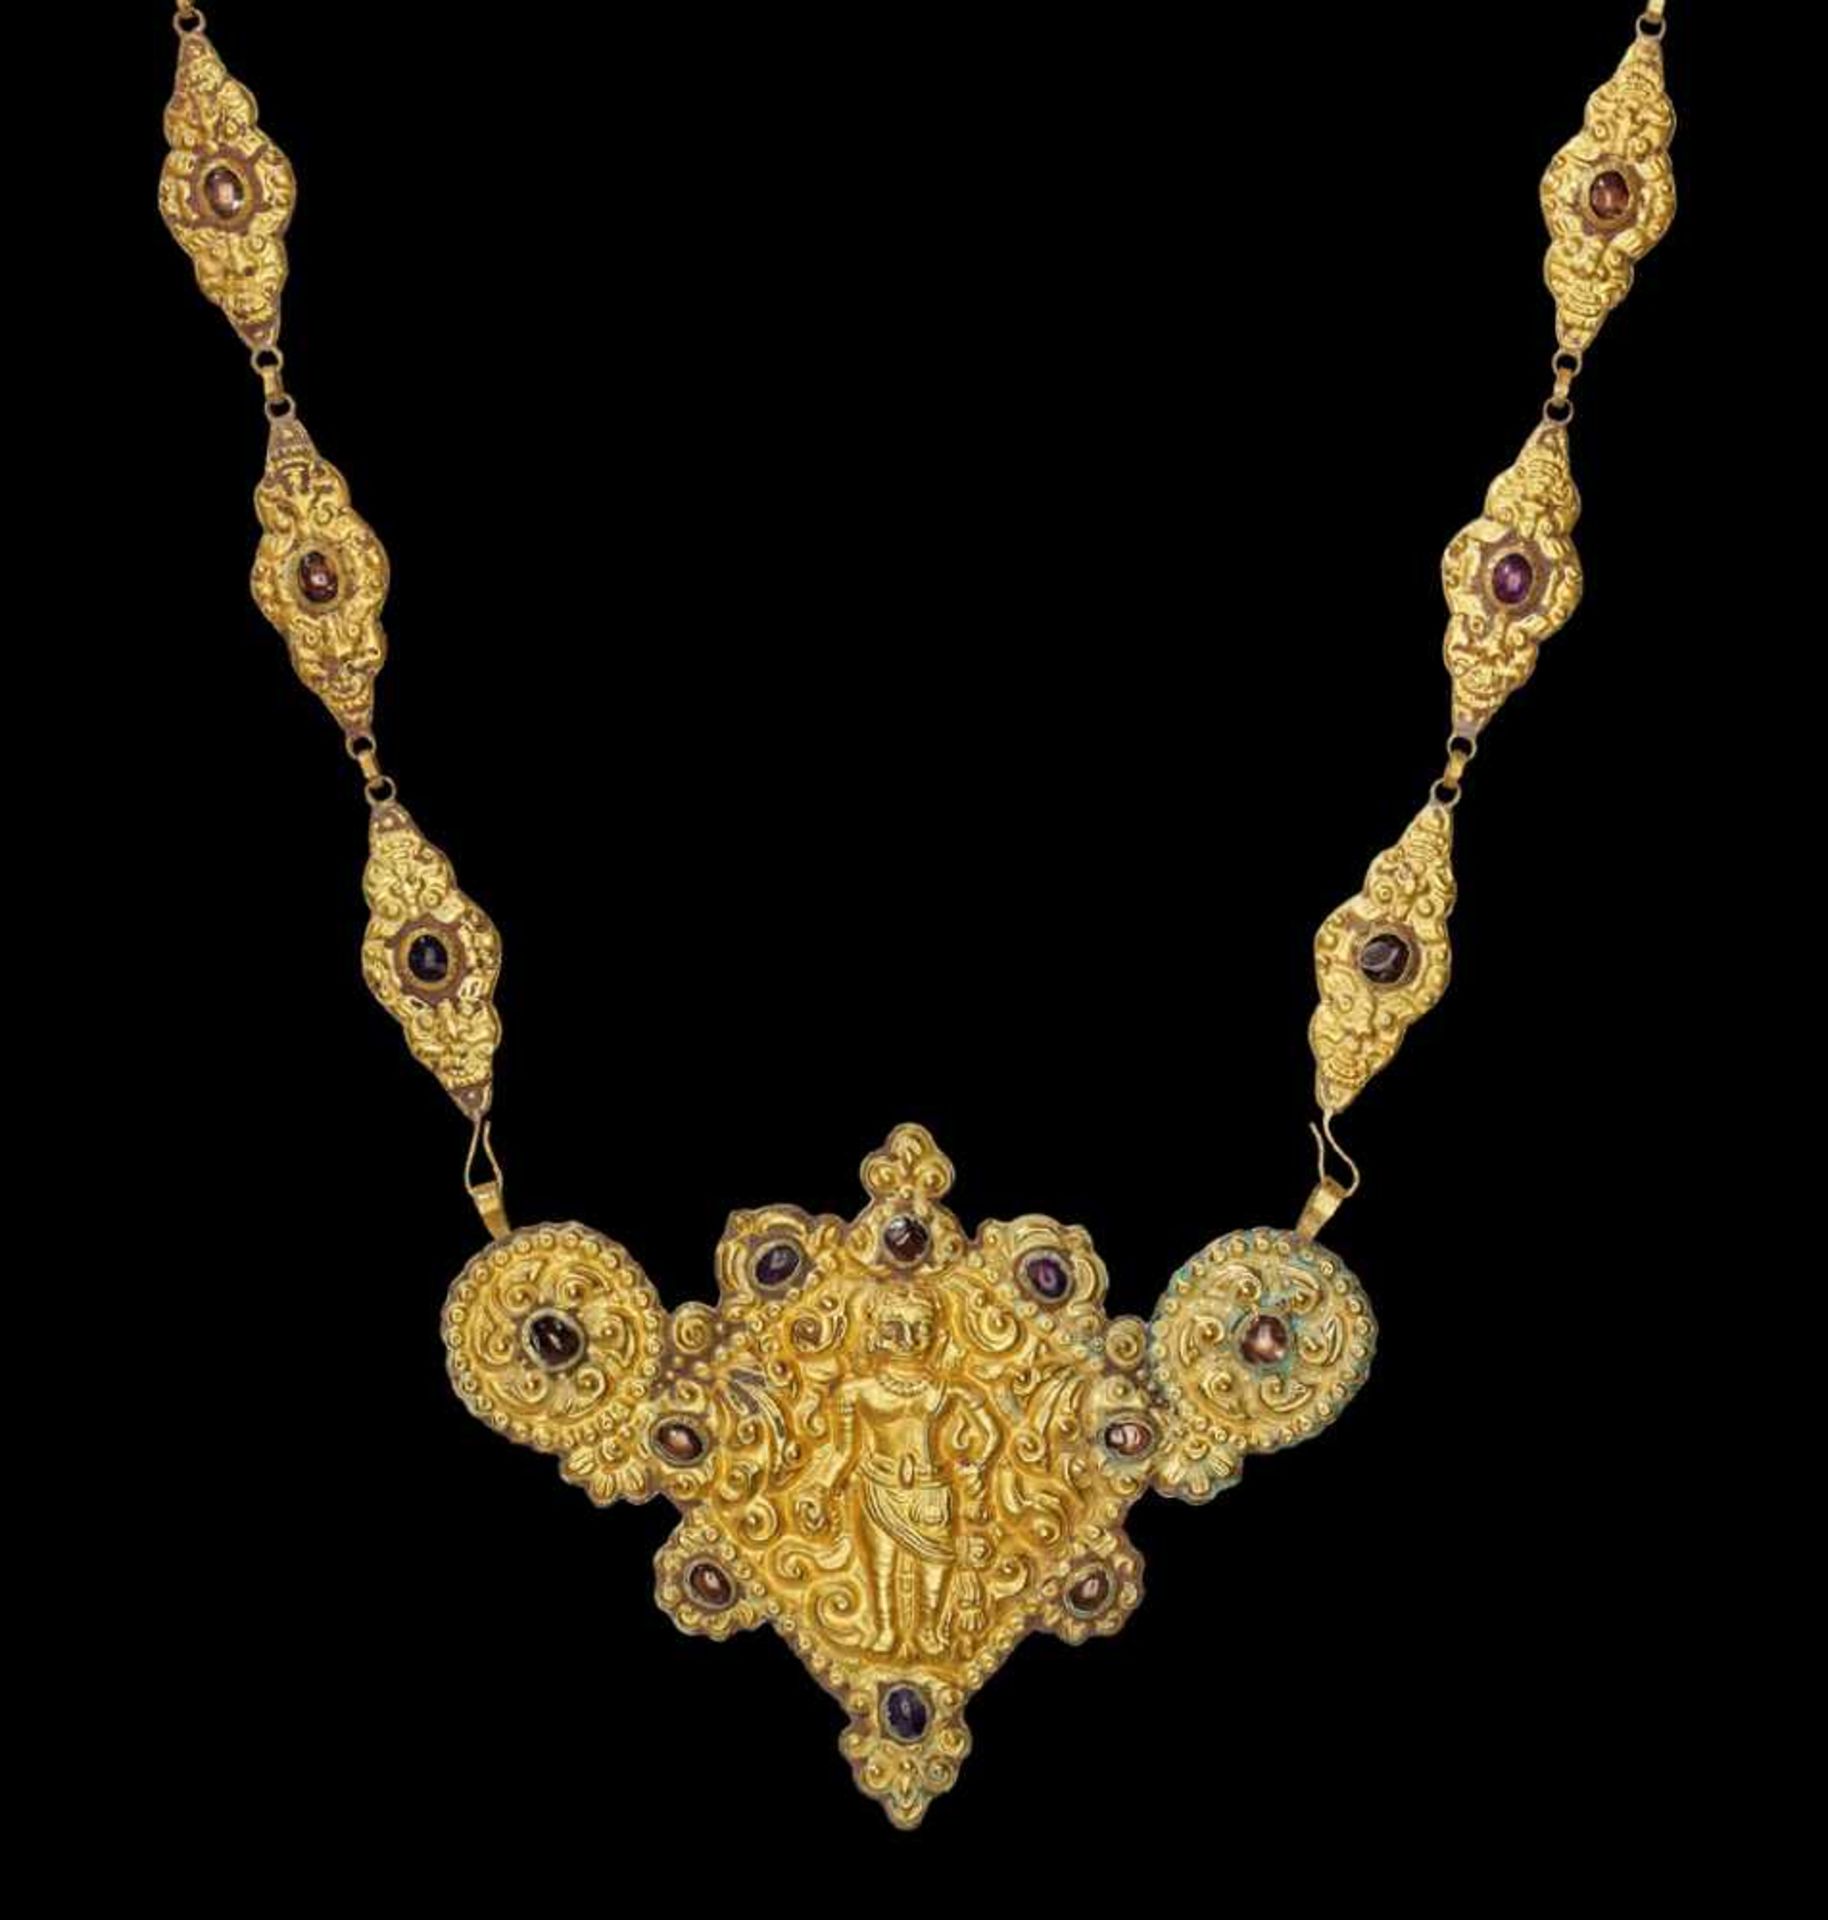 A CHAM REPOUSSÉ GOLD NECKLACE WITH A PECTORAL DEPICTING A HINDU DEITY Central Cham kingdom, - Image 2 of 6